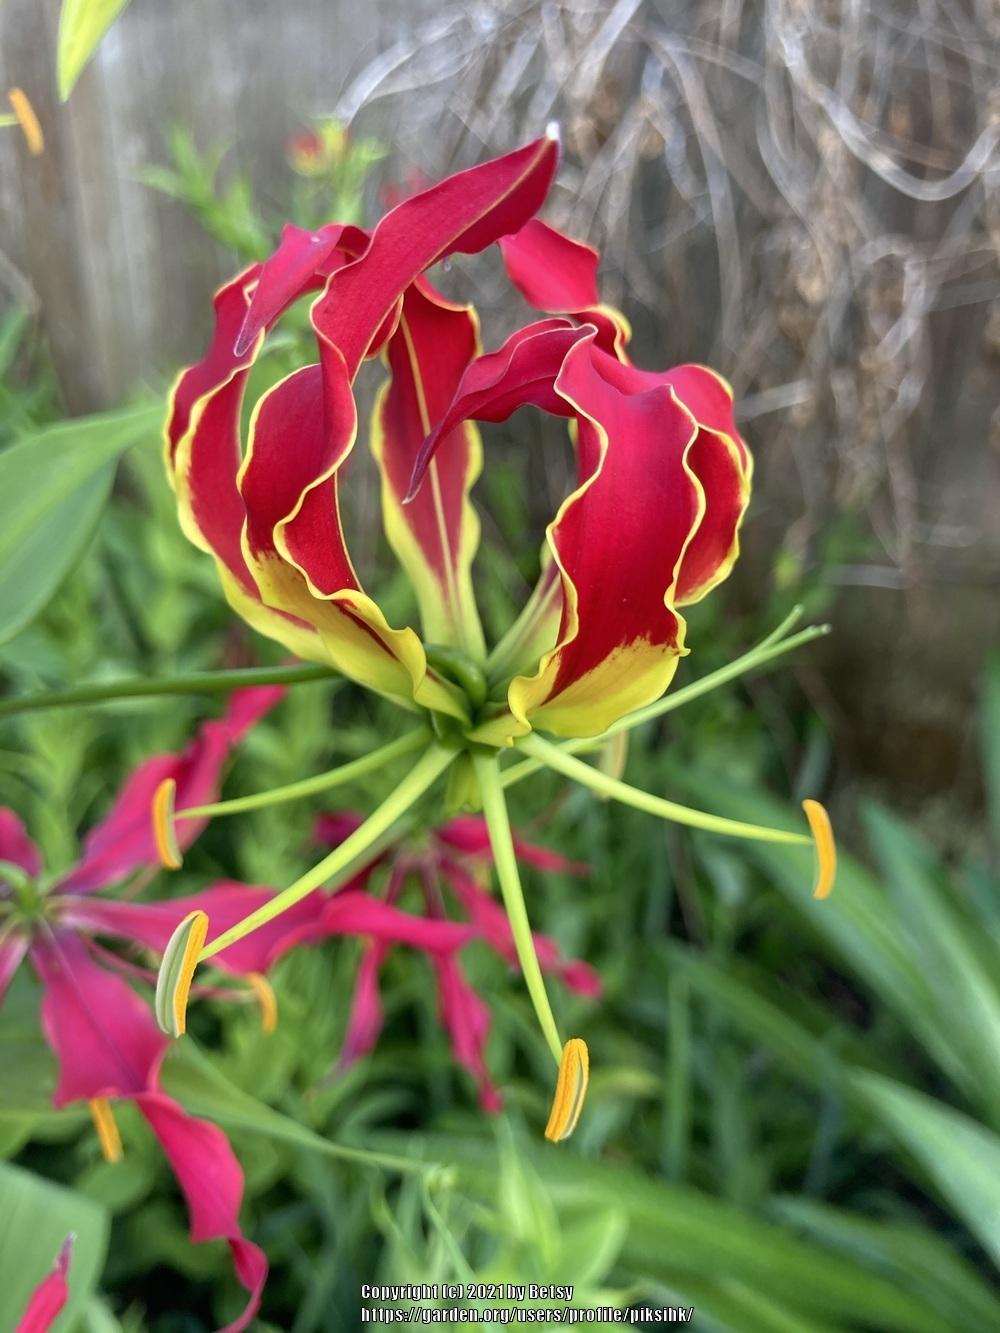 Photo of Flame Lily (Gloriosa) uploaded by piksihk